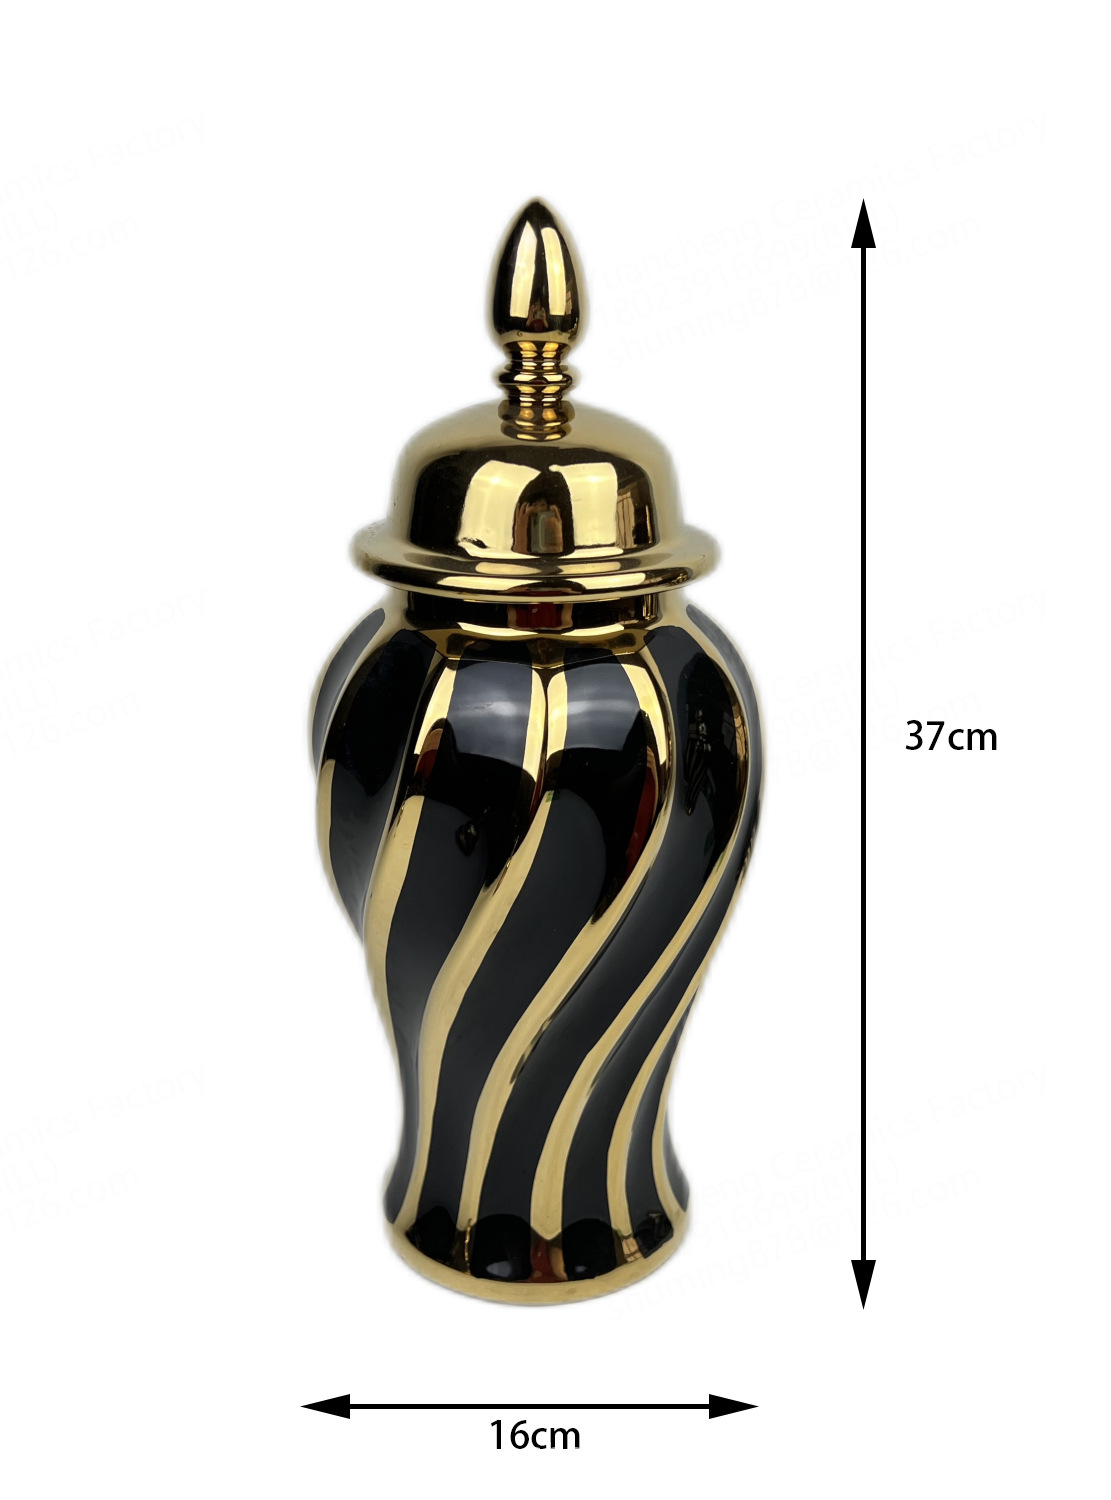 European-Style Ceramic Electroplating Spiral Pattern Temple Jar Decorative Ornaments Light Luxury Crafts Gold Sample Room Decoration Black and White